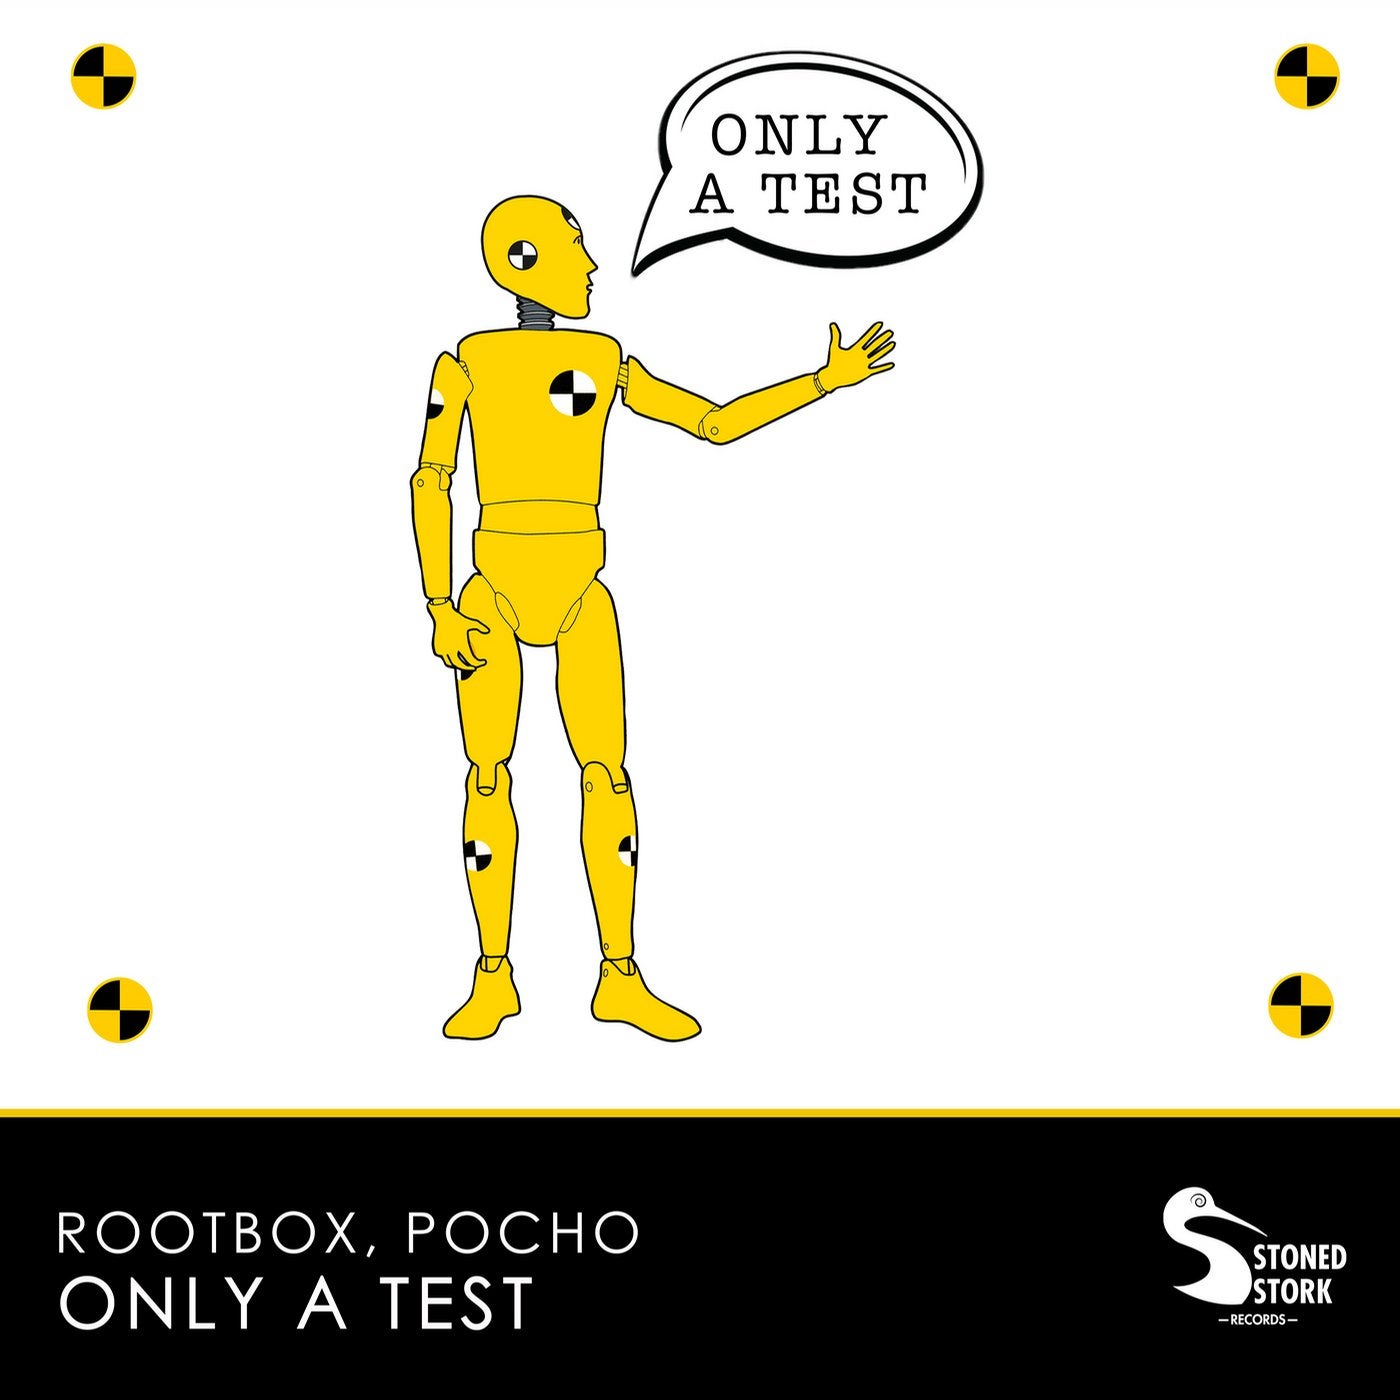 Only a Test